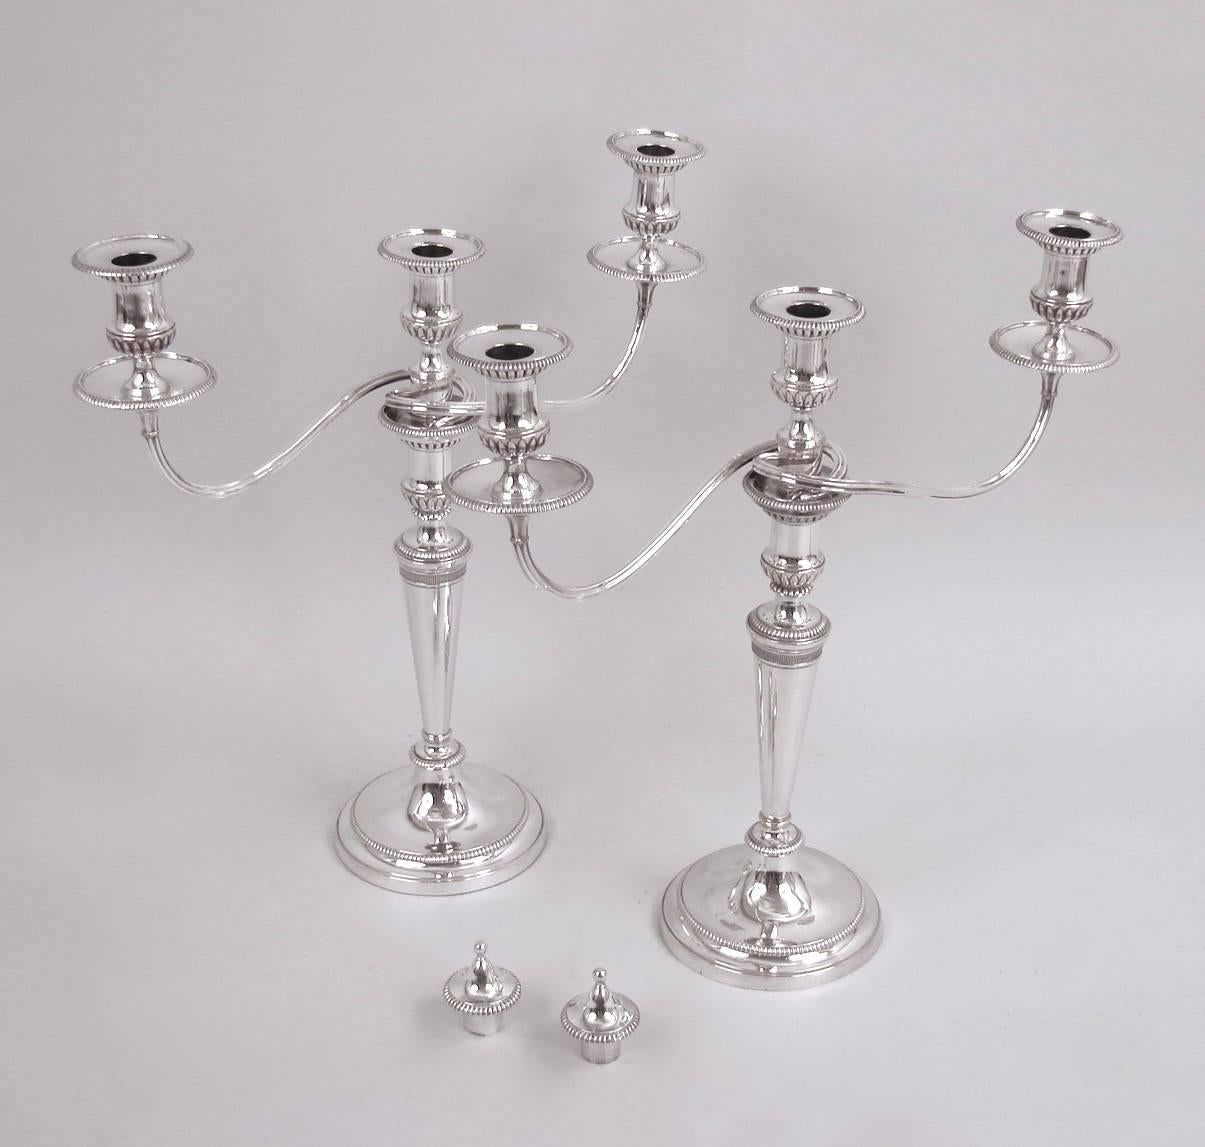 A nice pair of English columnar convertible three-branch candelabra in the neoclassical taste, the removable arms with finials (useable with two or three lights or as candlesticks) each urn form nozzle with beaded rims and conforming bases, circa